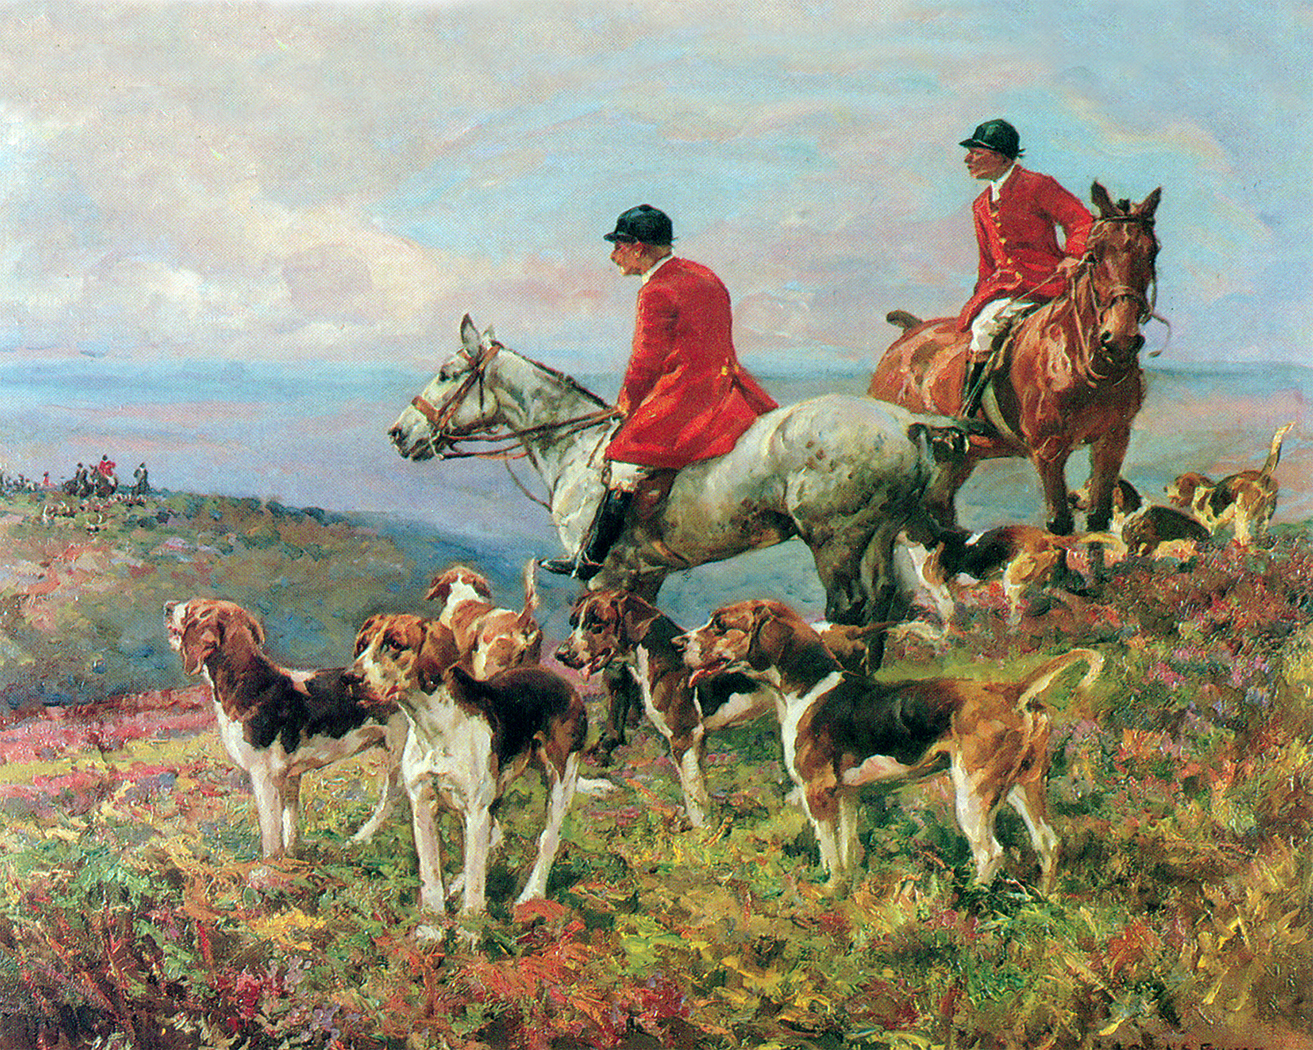 Equestrian/Fox Equestrian Hunting Scene (c. 1908) Oil Painting Print Reproduction On Canvas